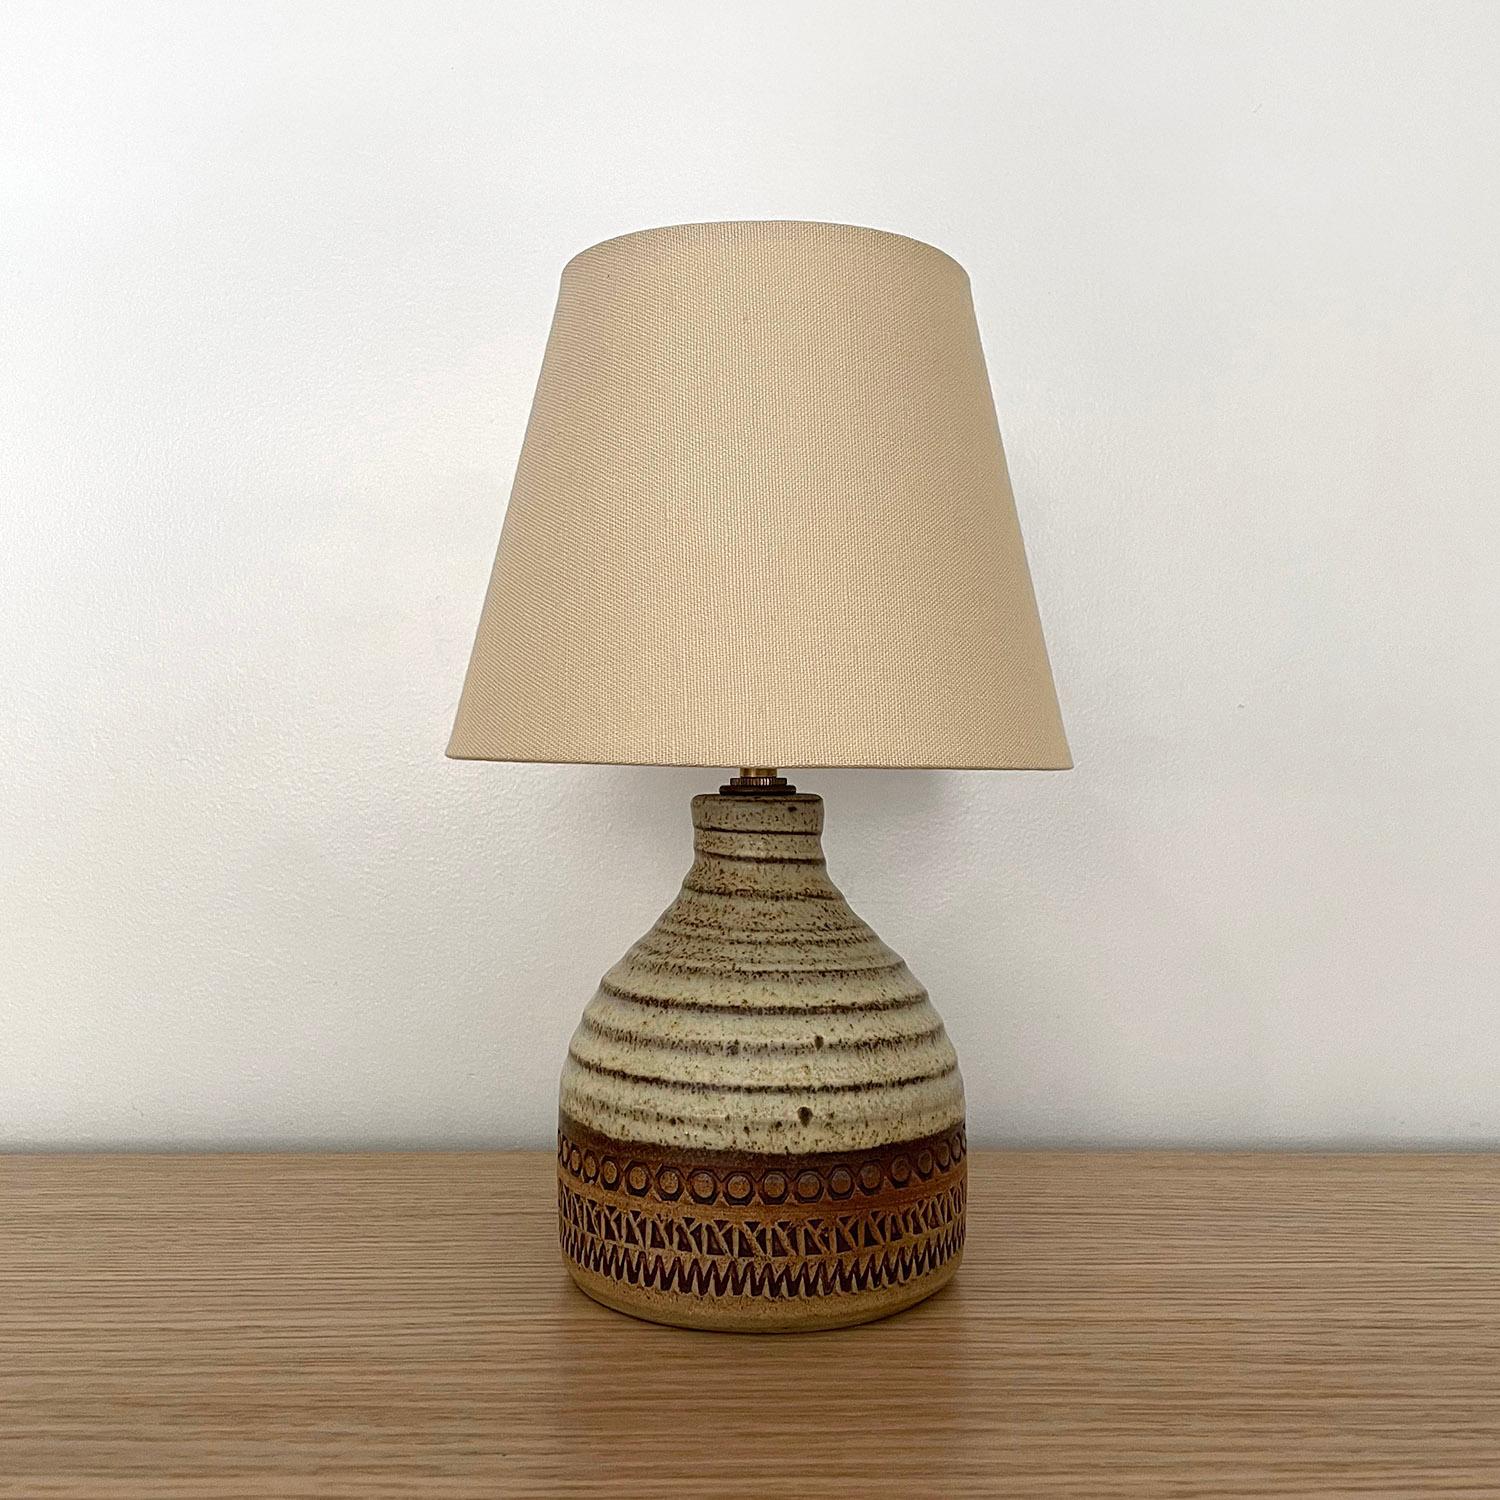 Broadstairs British pottery lamp
Britain, circa 1960s
Petite table lamp perfect to create mood lighting
Neutral toned ceramic body, rich with color and texture
Organic composition and feel
Etched patterned markings around base
Patina from age